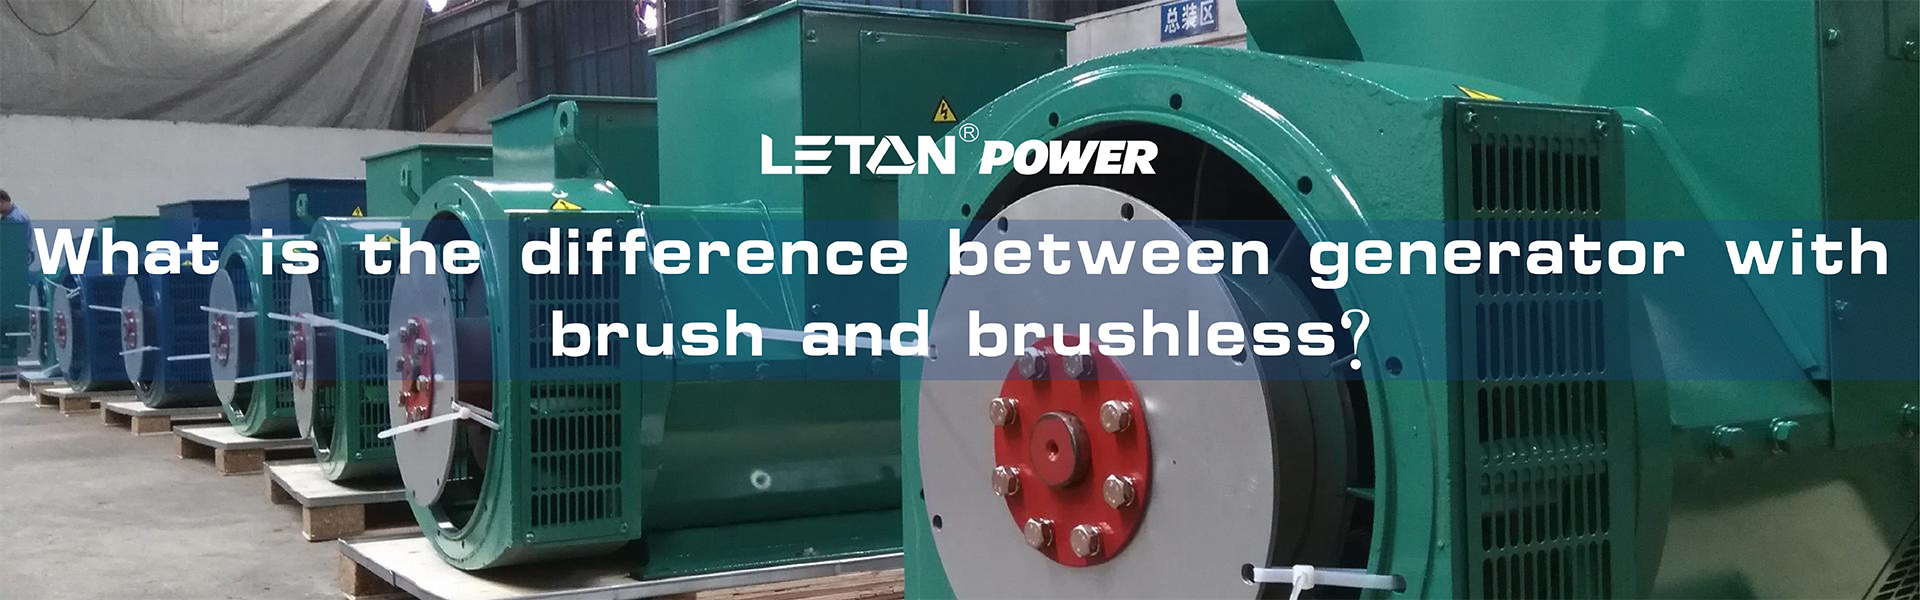 What is the difference between generator with brush and brushless?